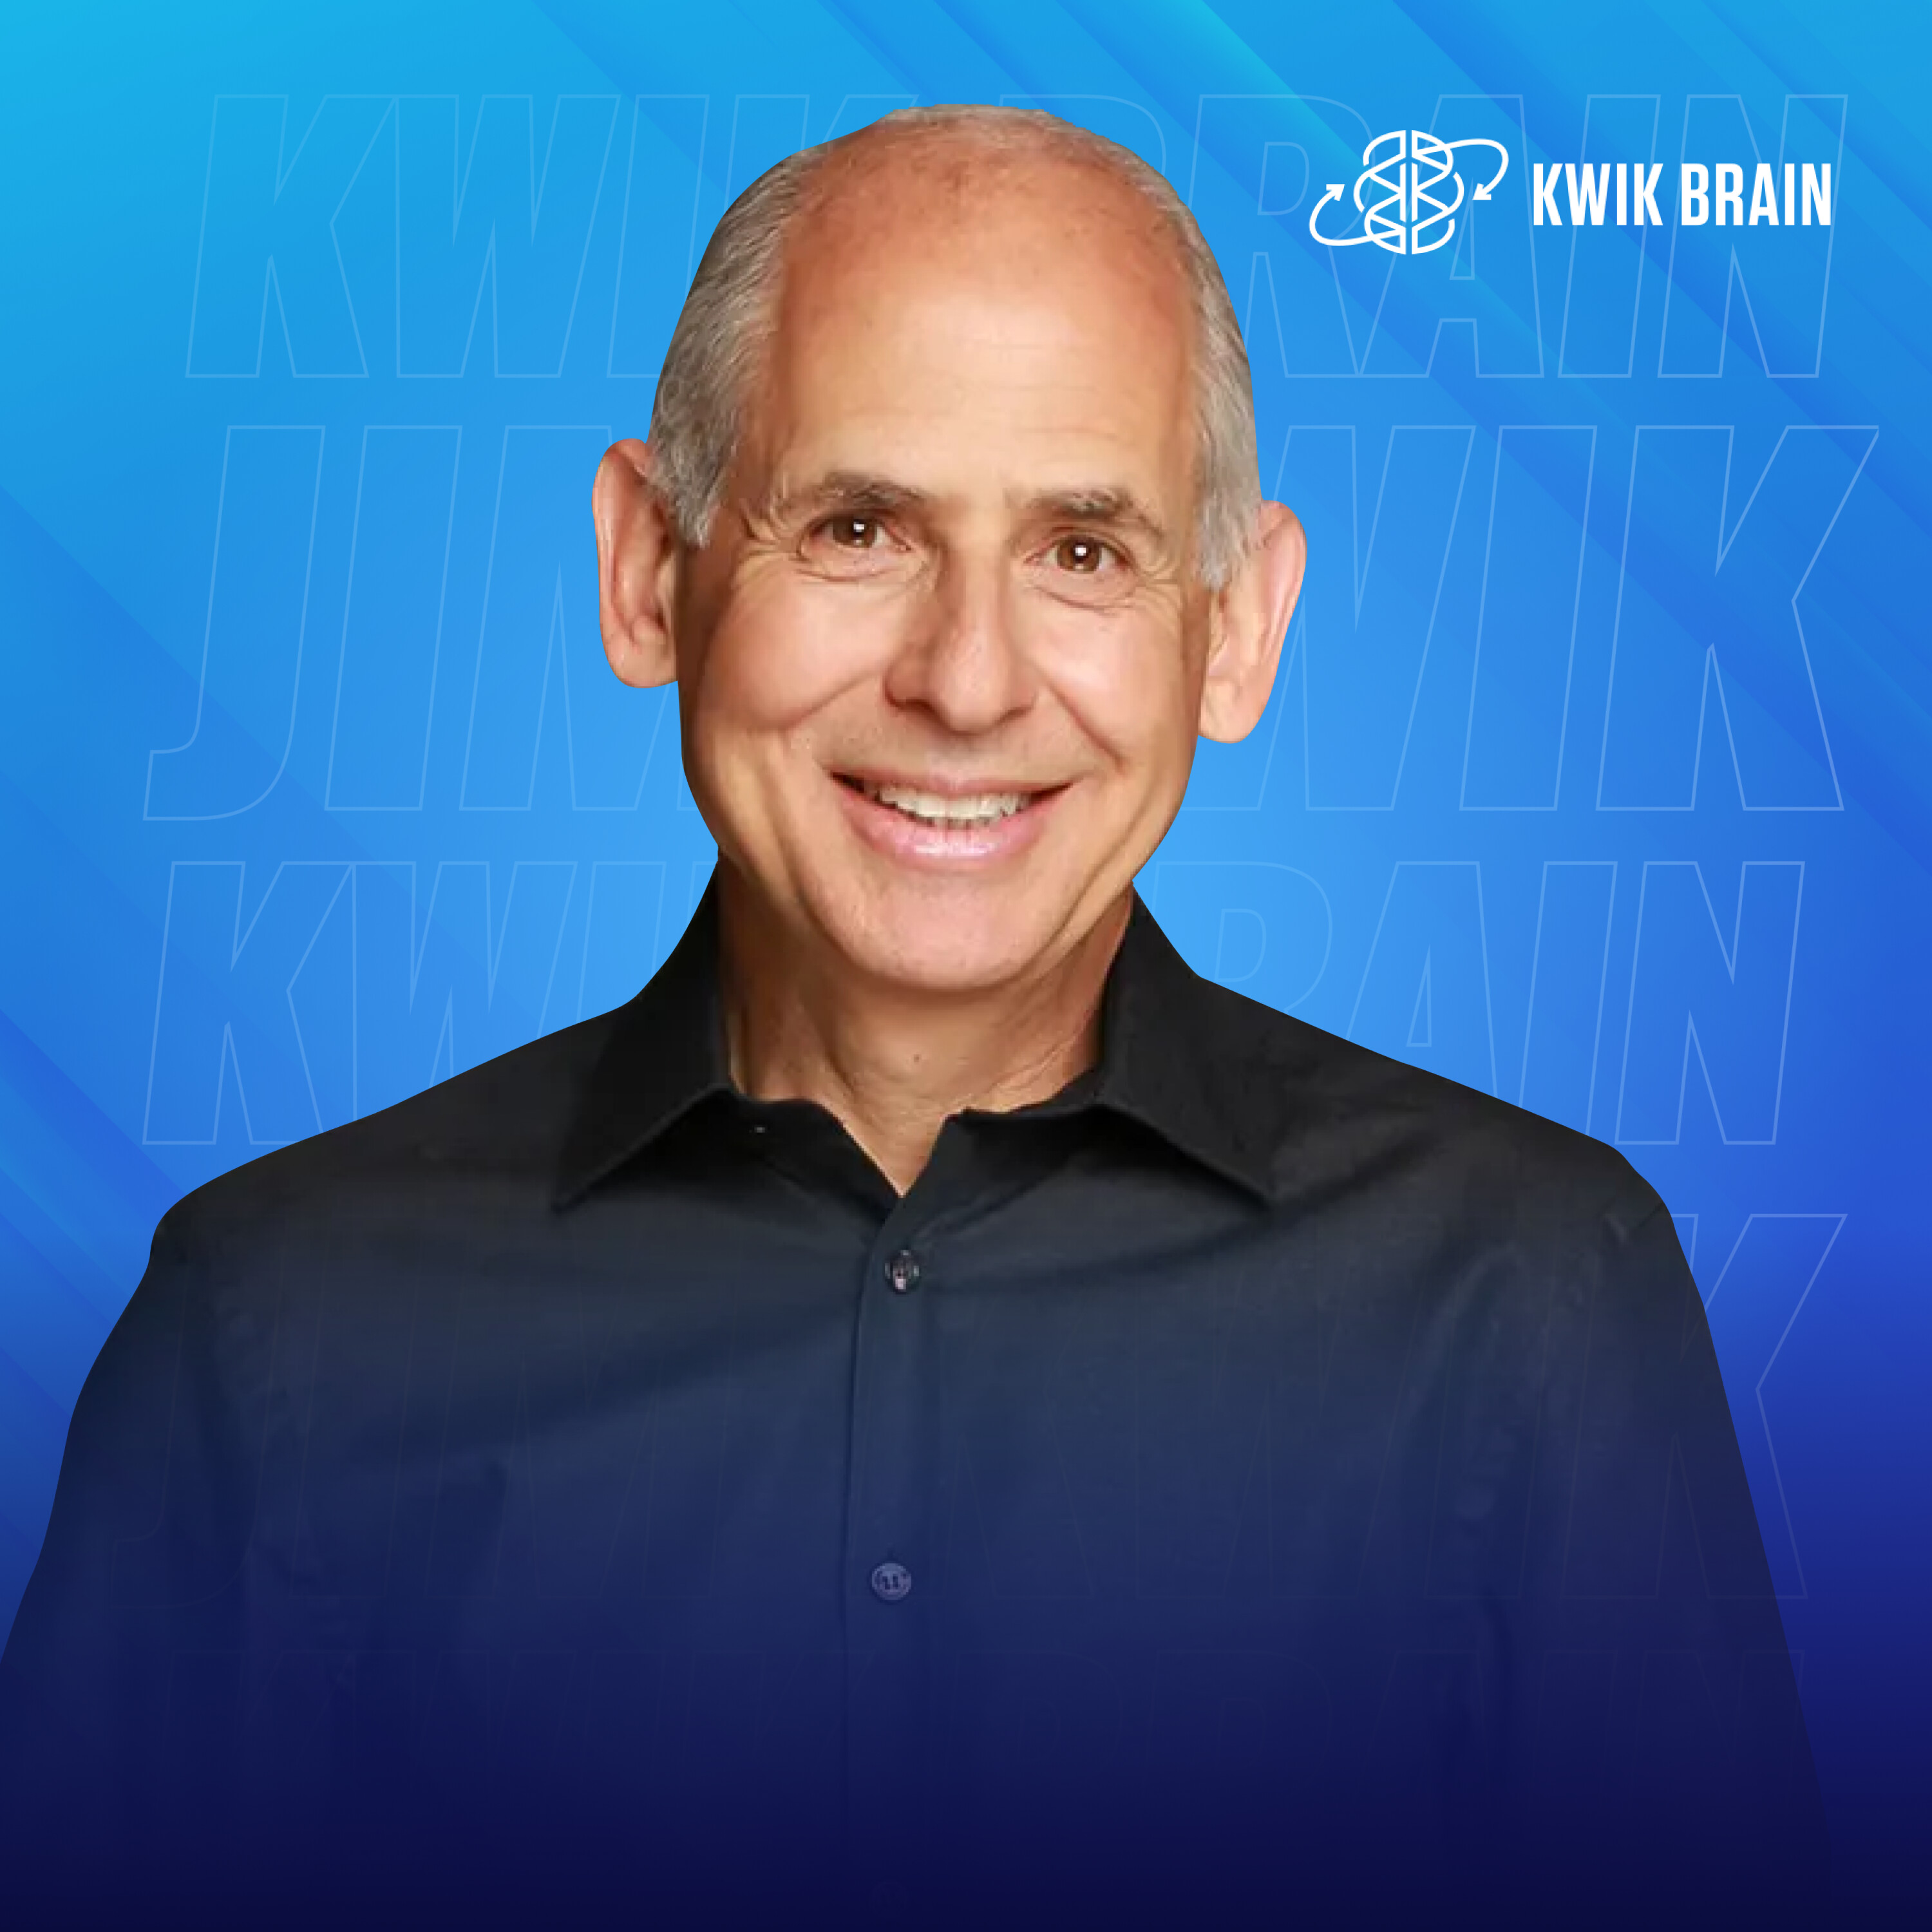 Daily Habits for Better Brain Health with Dr. Daniel Amen